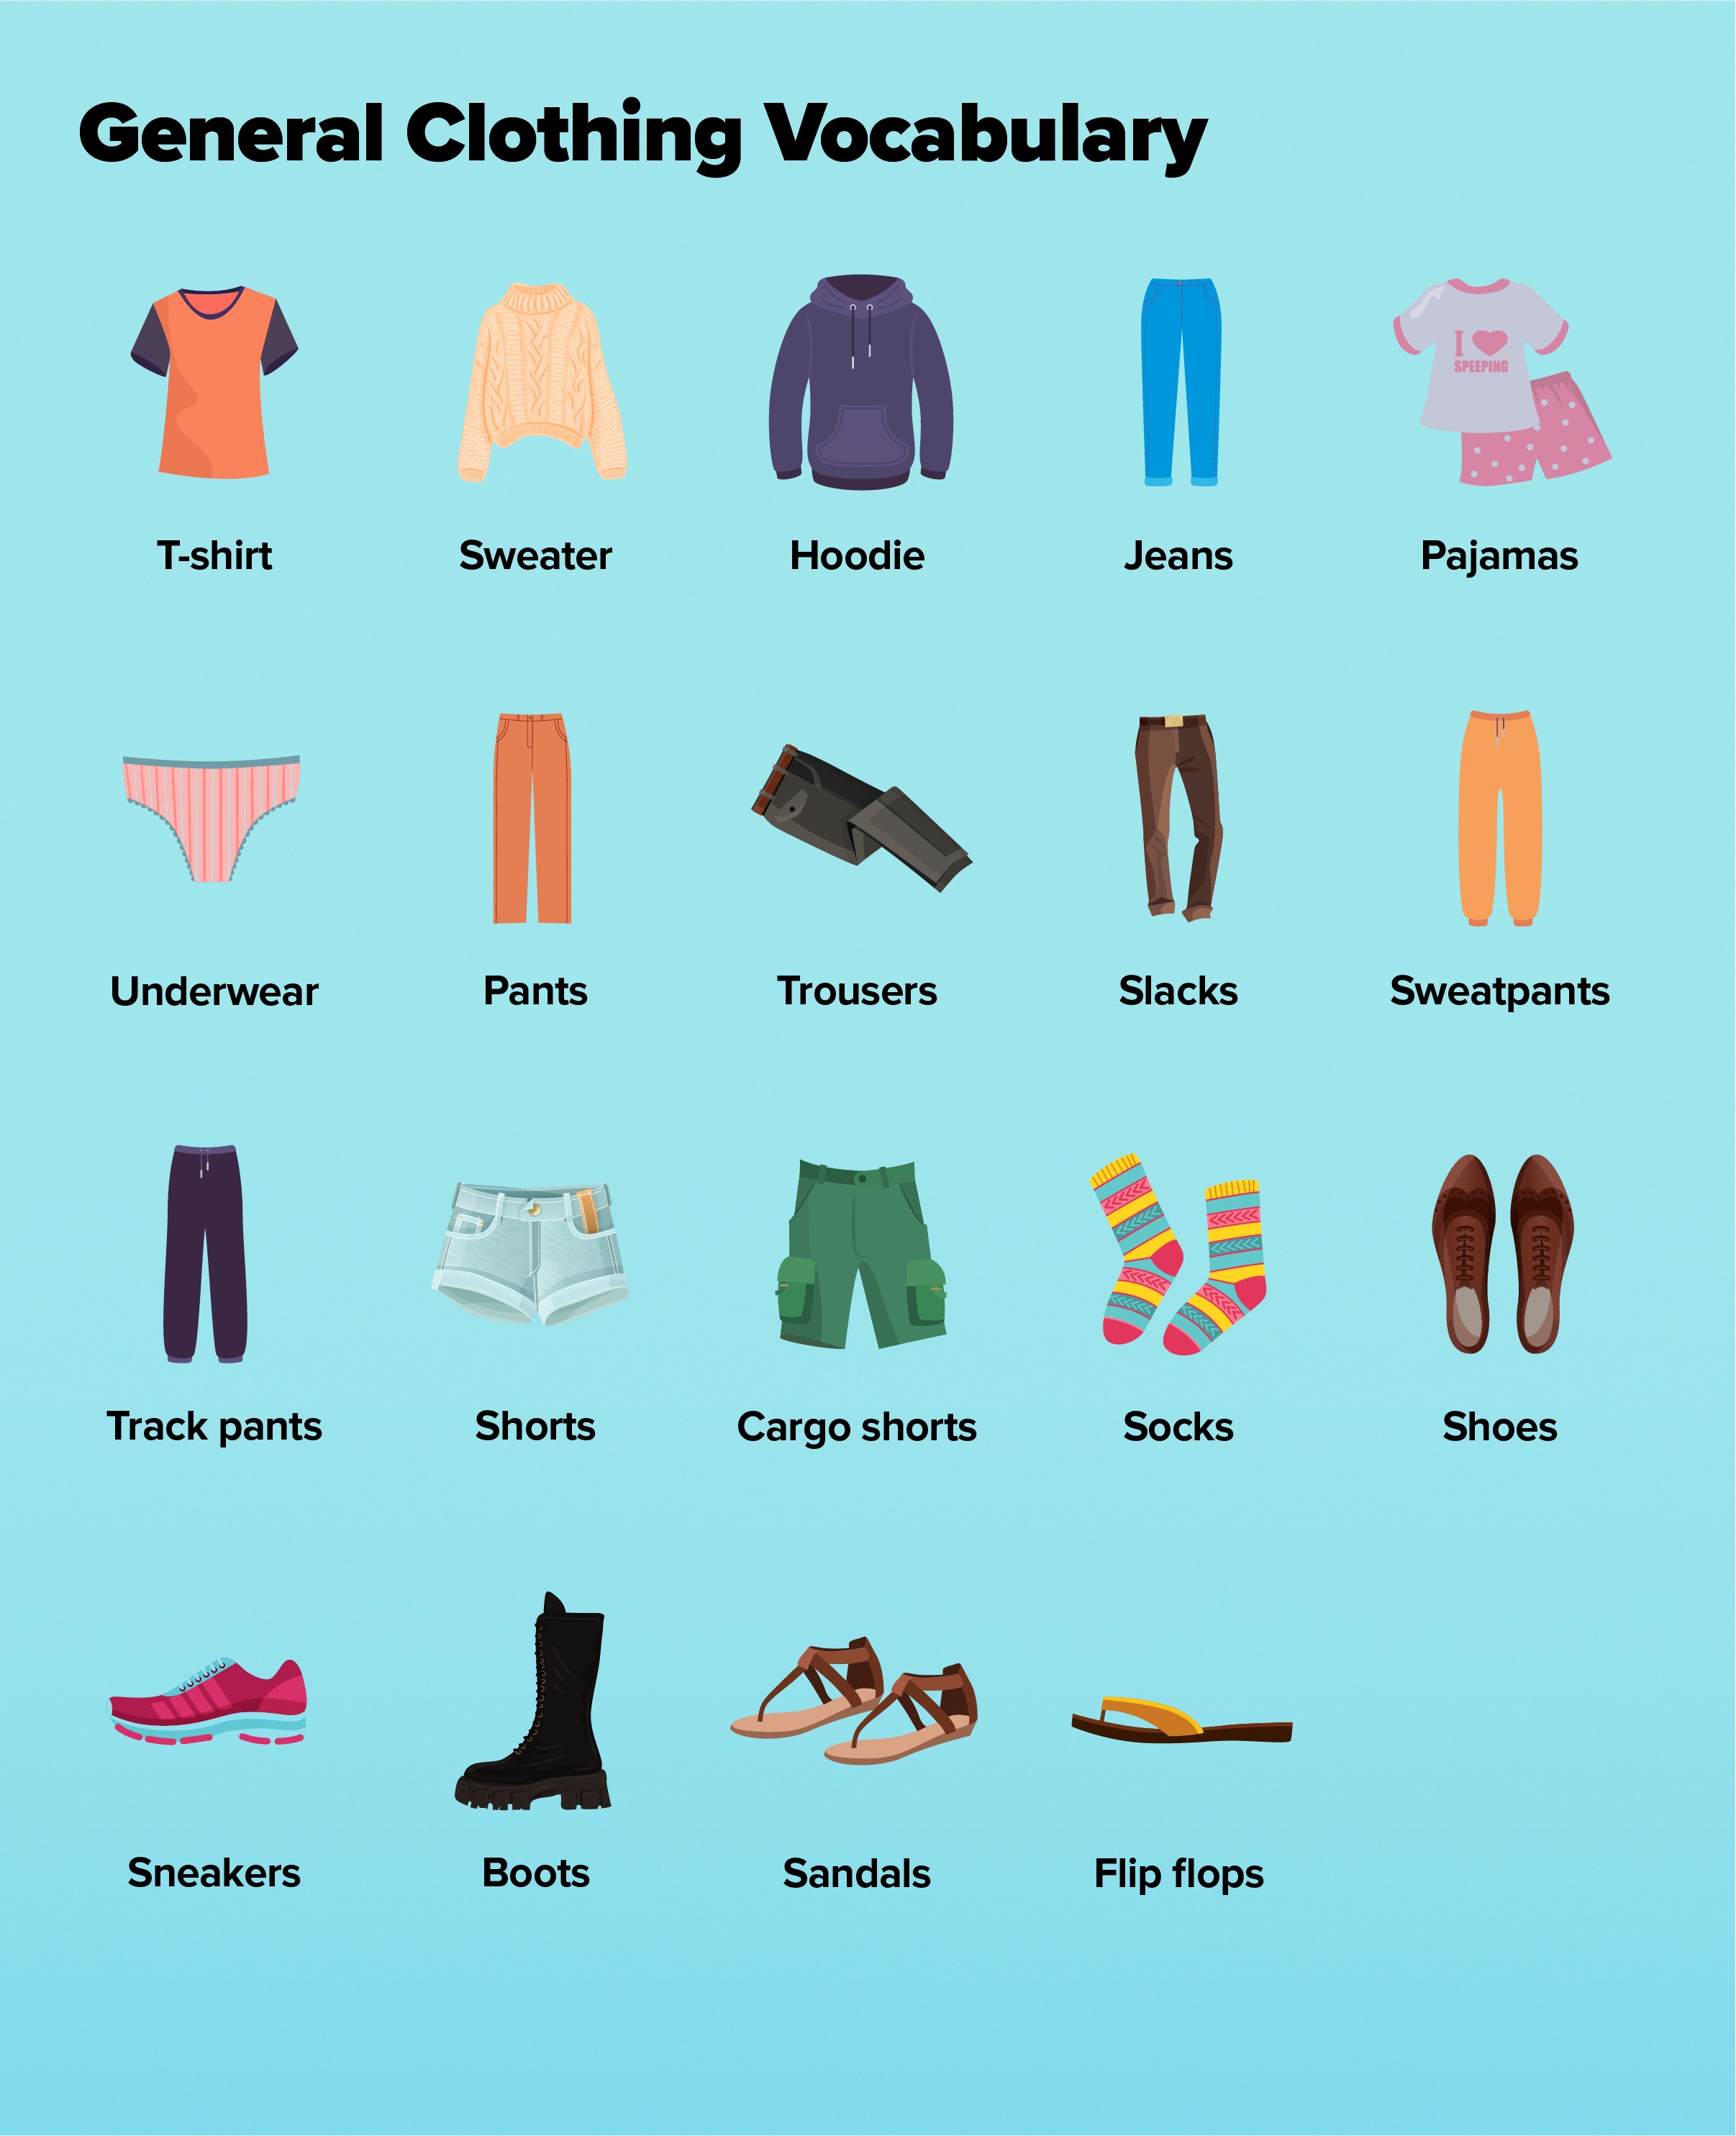 English Clothes Vocabulary, from Wardrobe Essentials to Seasonal Styles